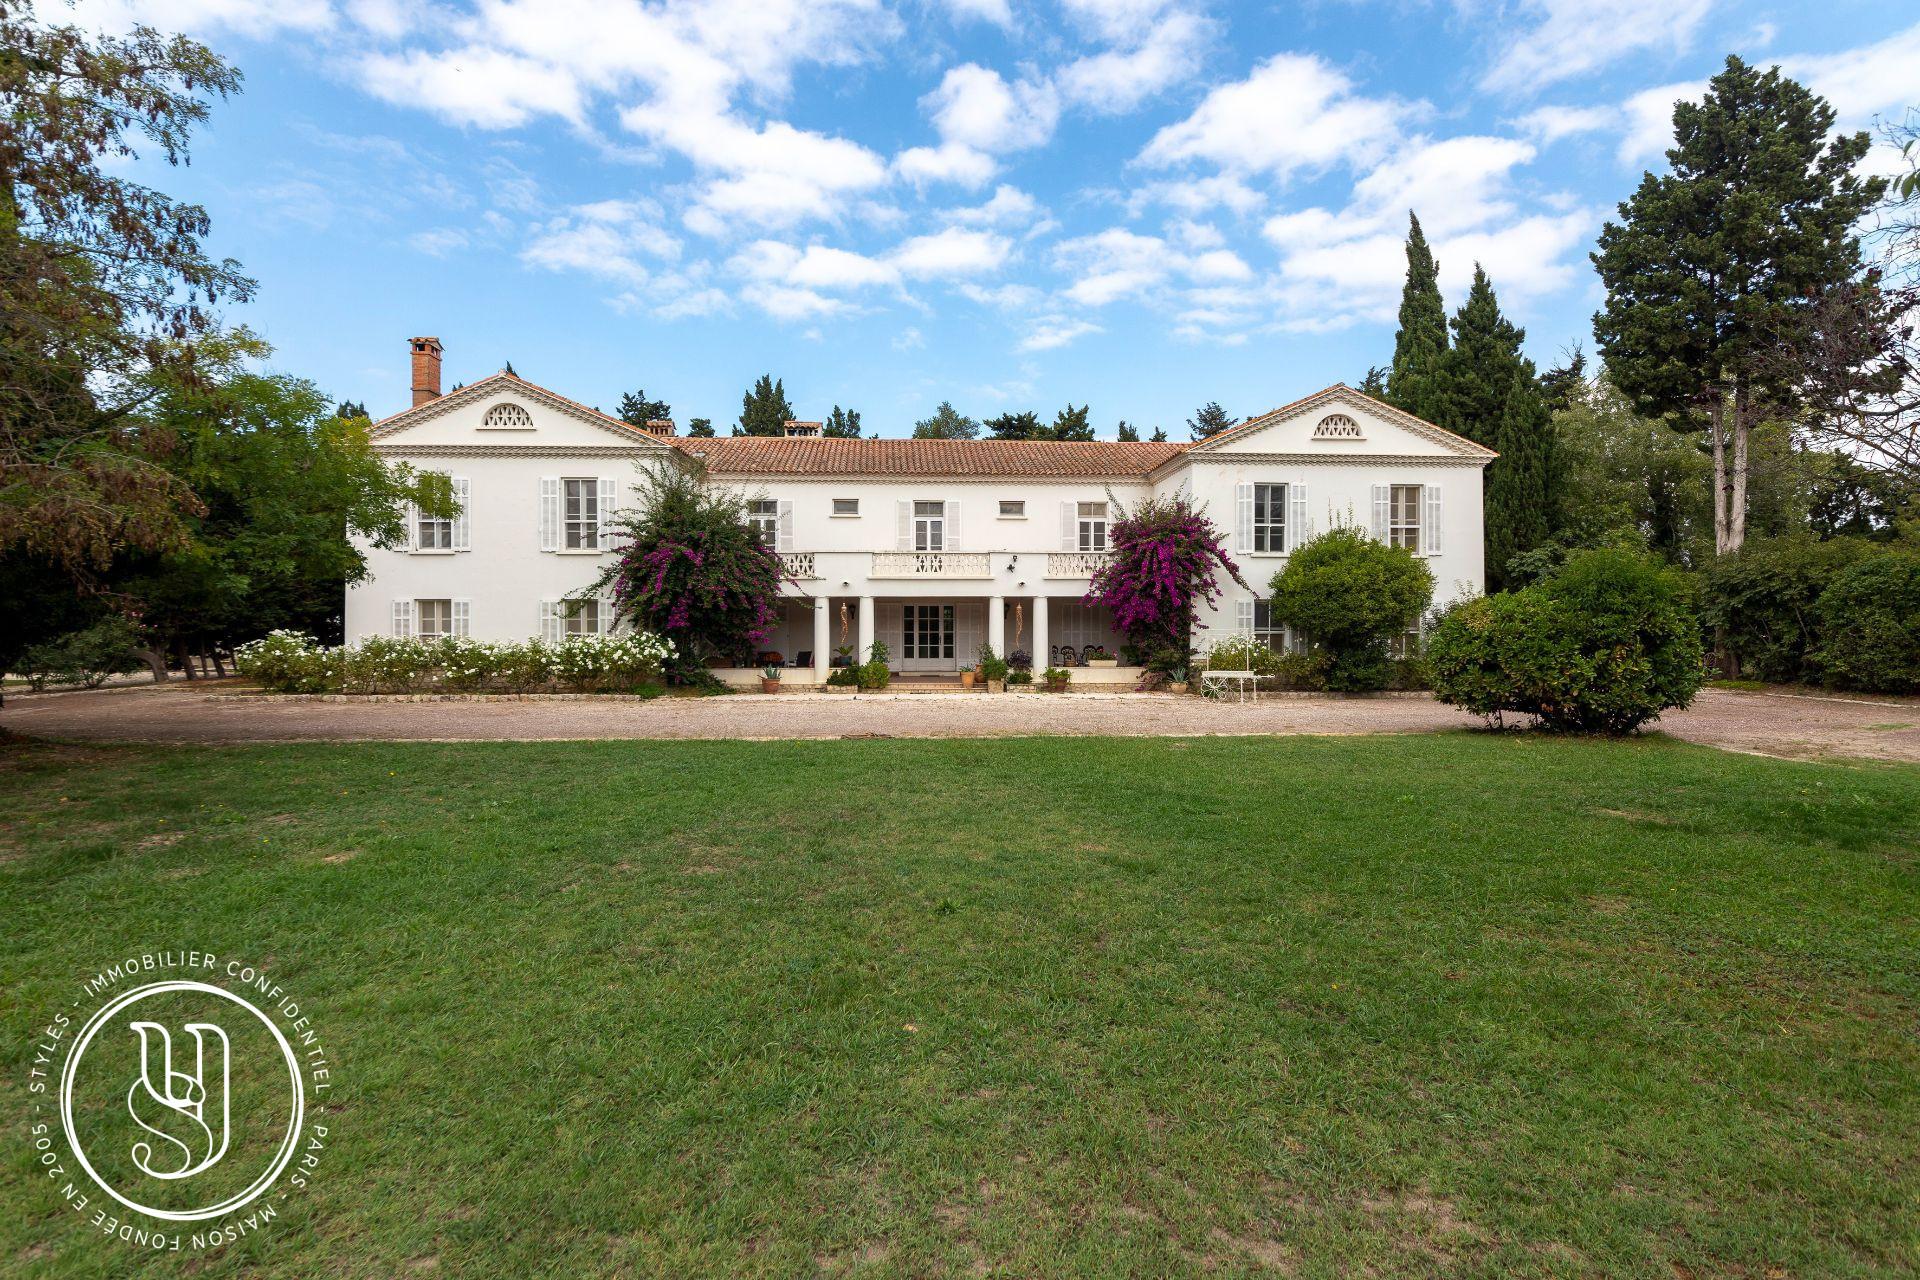 Arles - A property nestled in the heart of a magnificent park - image 5